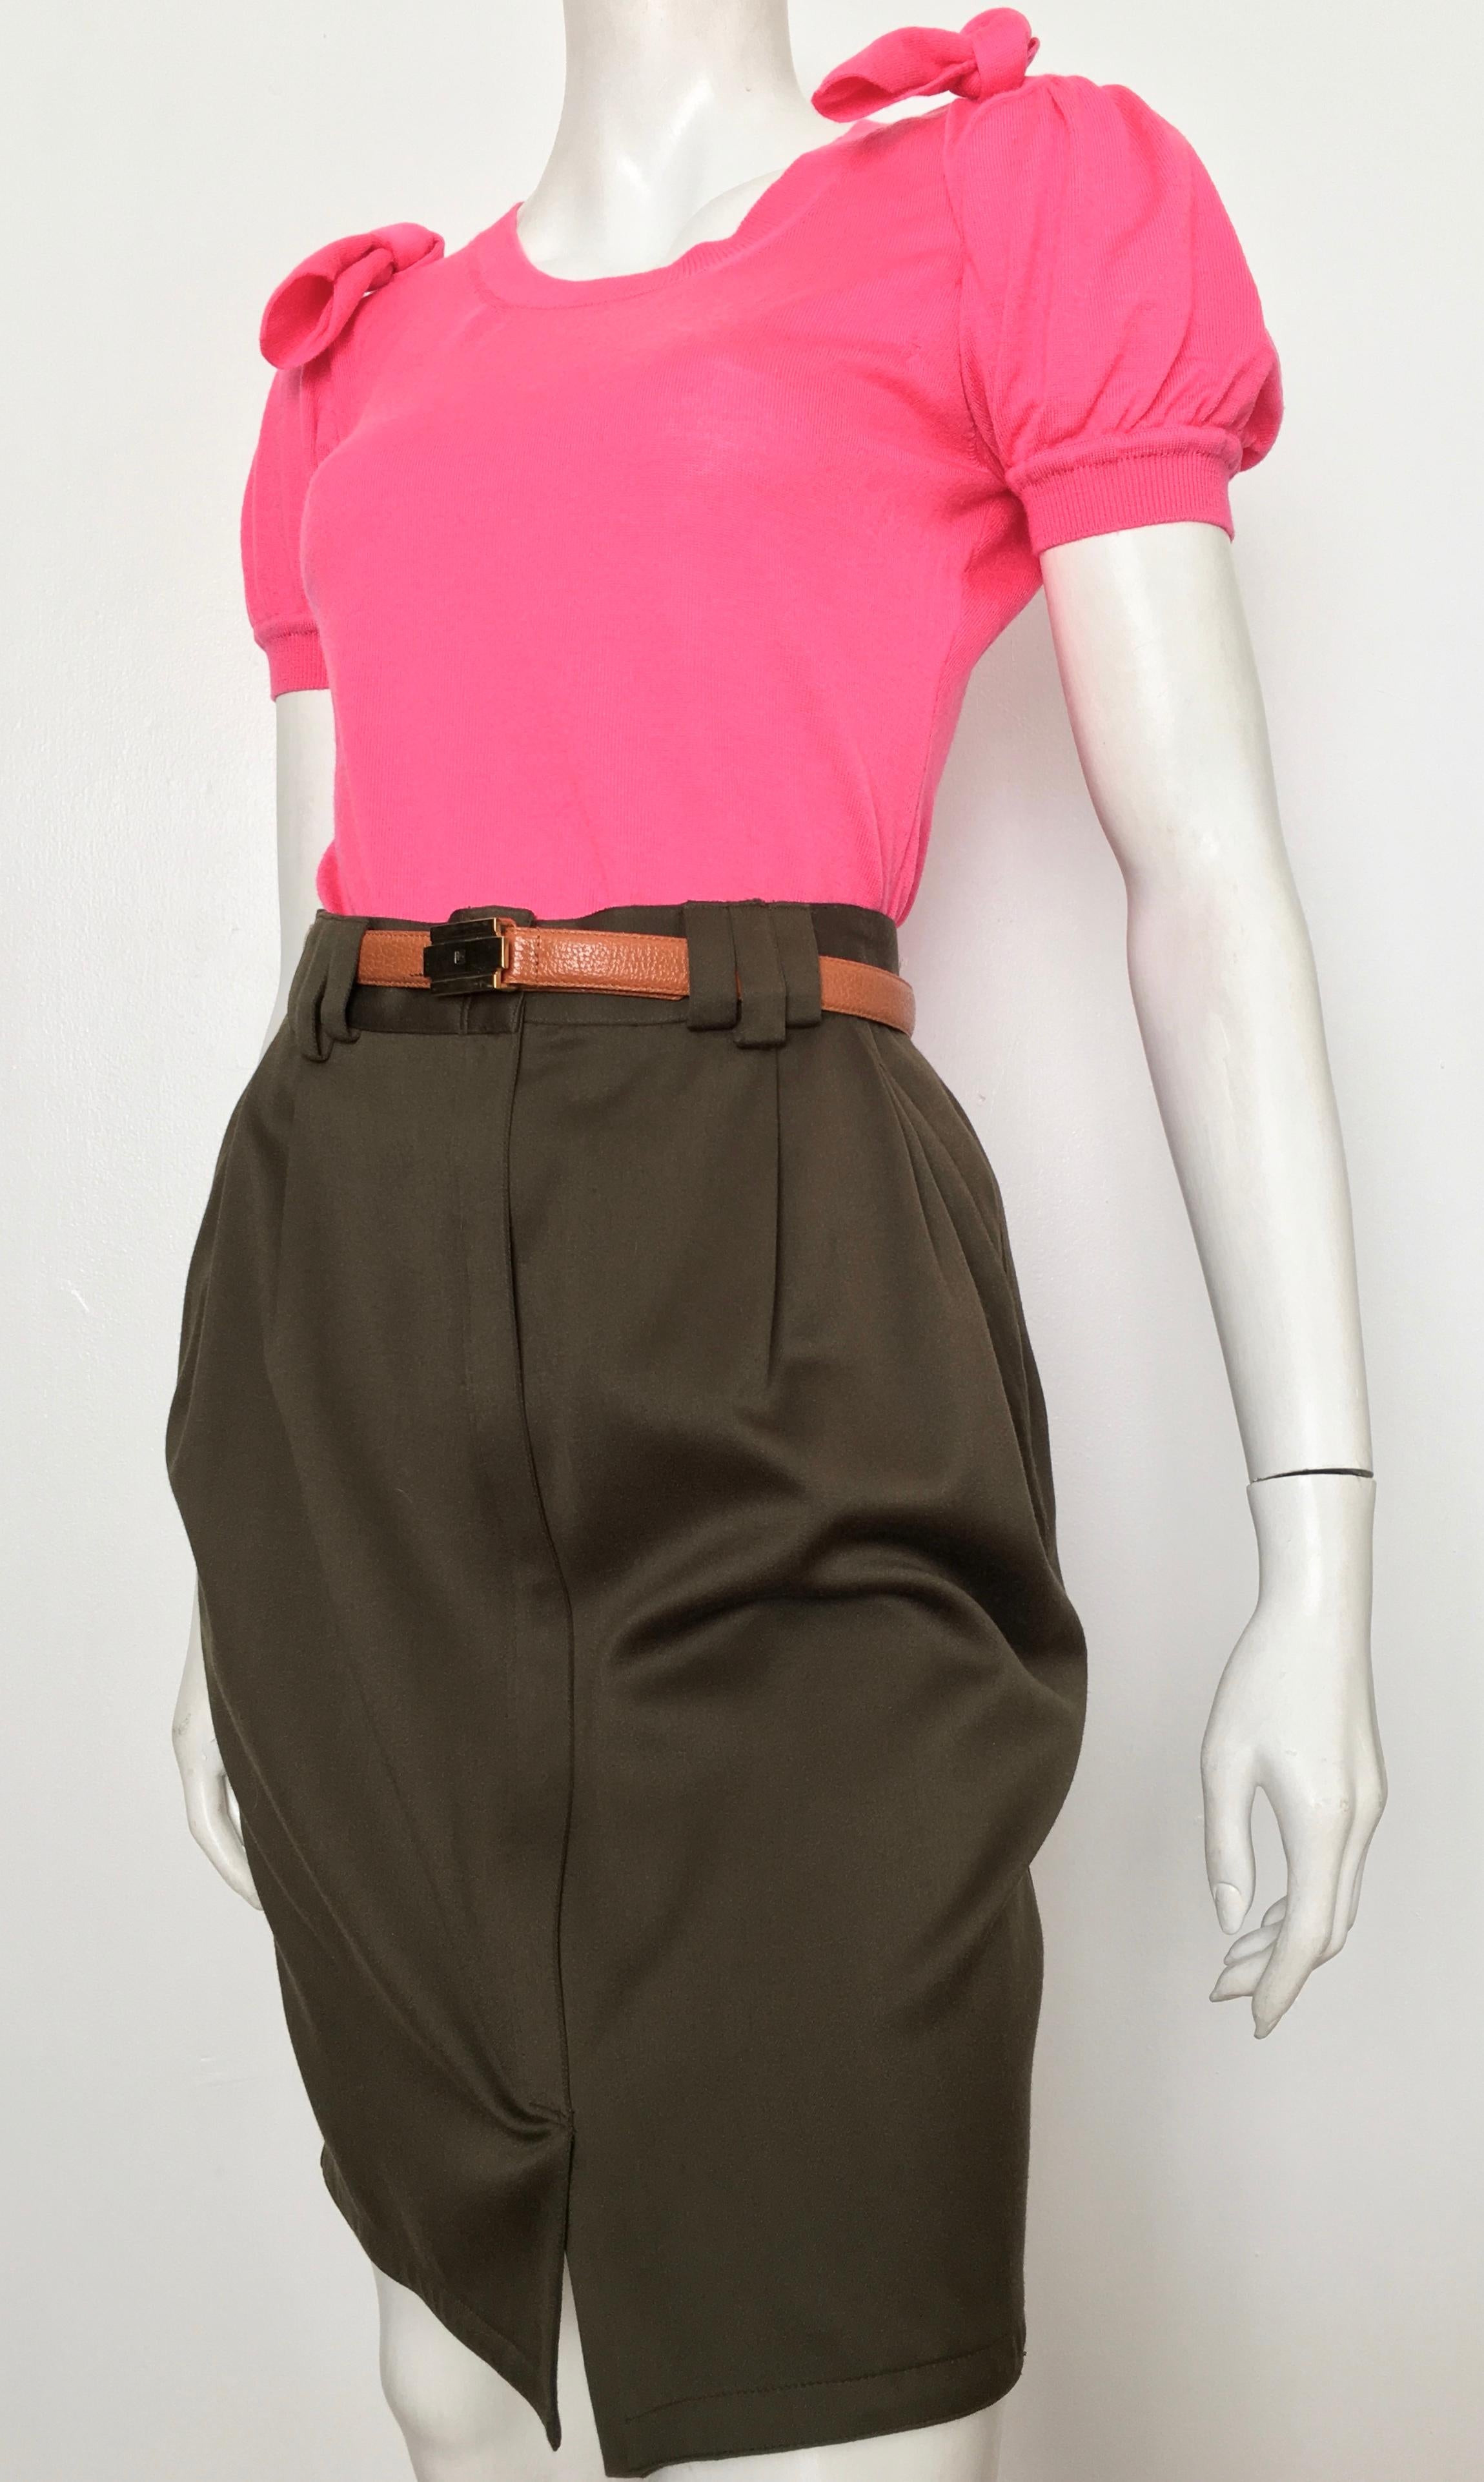 Gianni Versace 1980s Olive Wool Skirt with Pockets Size 6. For Sale 8